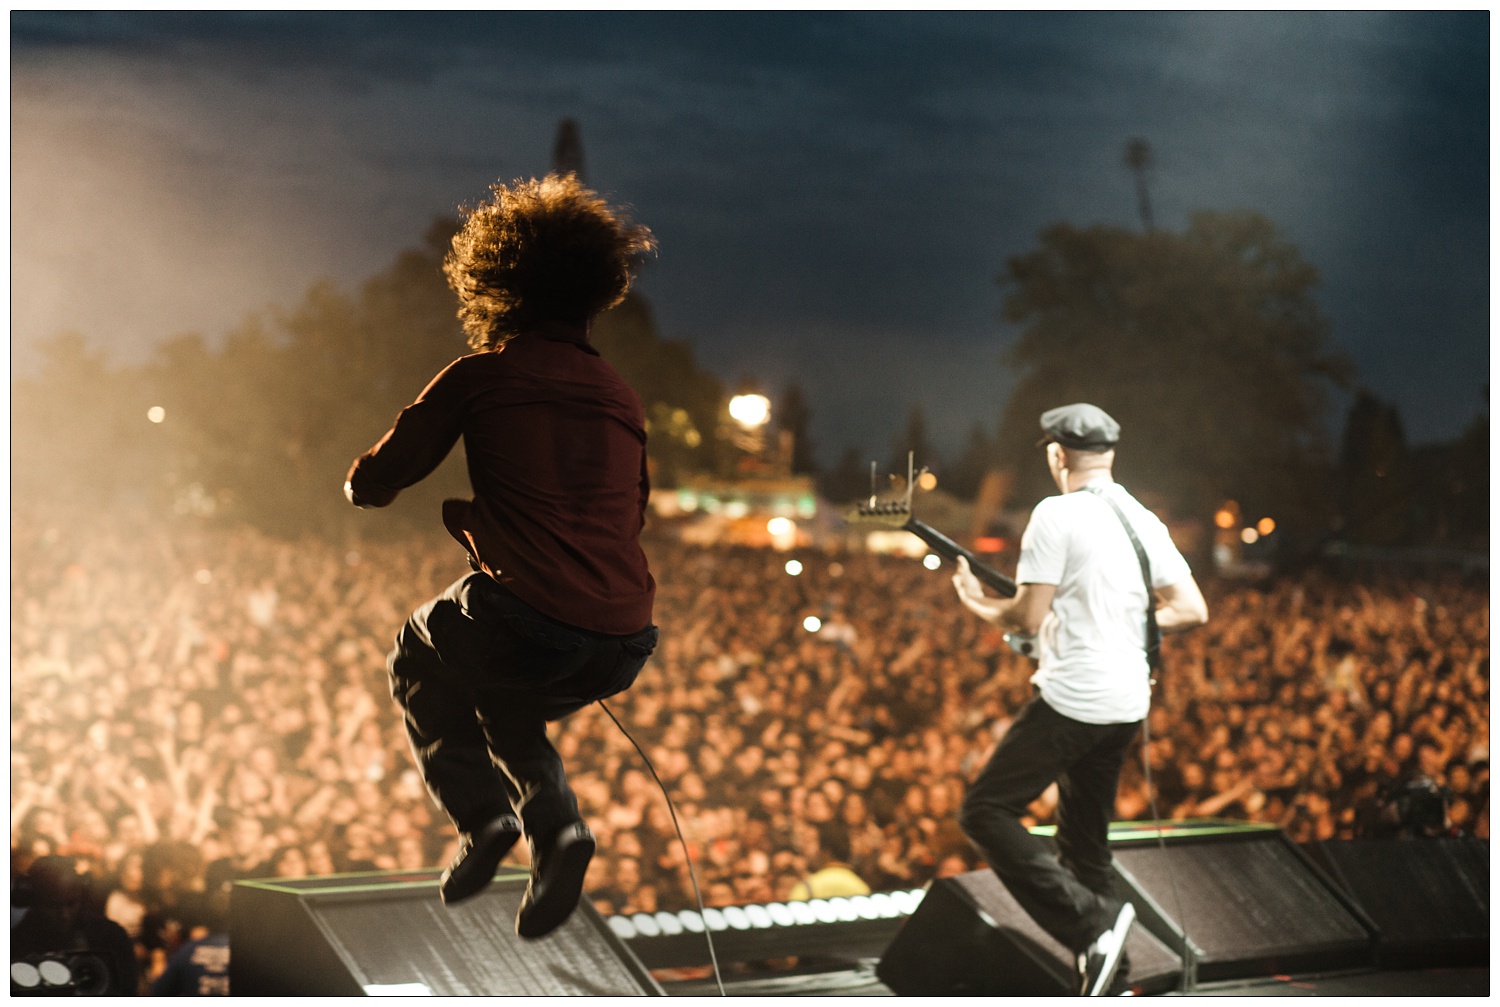 View of the crowd, Zack de la Rocha jumping, and Tom Morello at Rage Against the Machine gig from the stage at Finsbury Park.